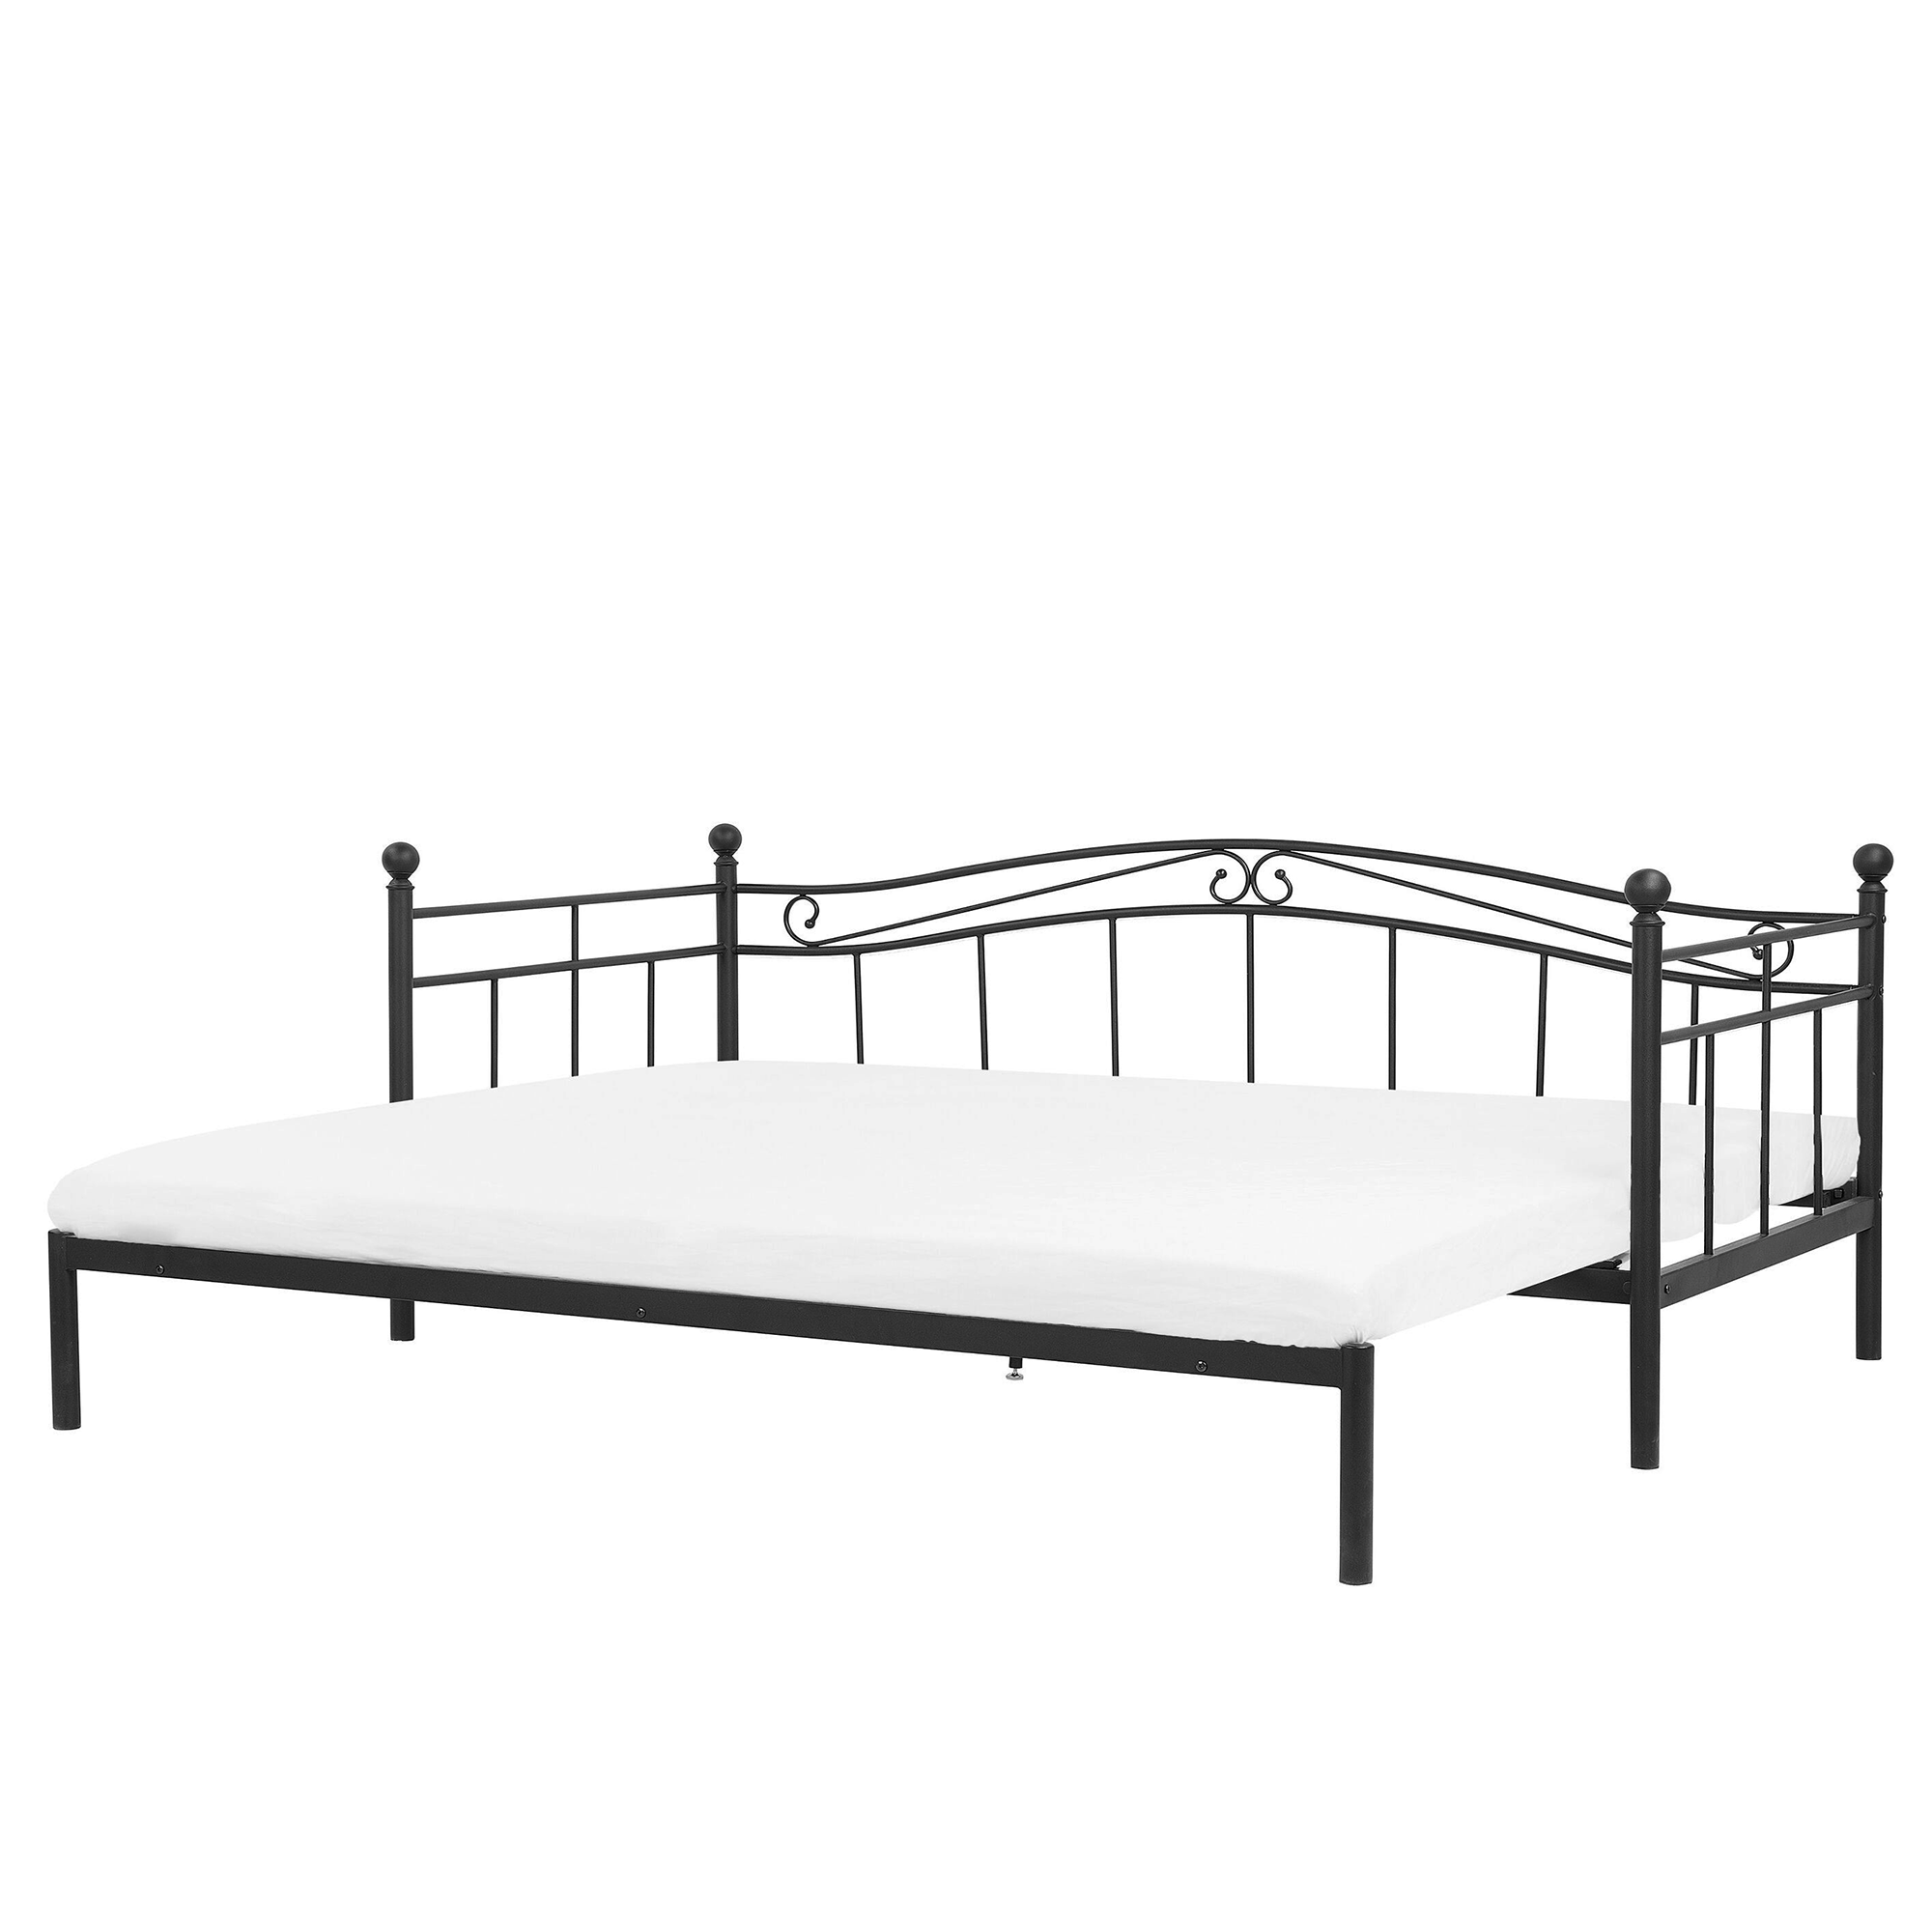 Beliani Daybed Trundle Bed Black EU Single 2ft6 to EU King Size 5ft Slatted Base Pull-Out Convertible